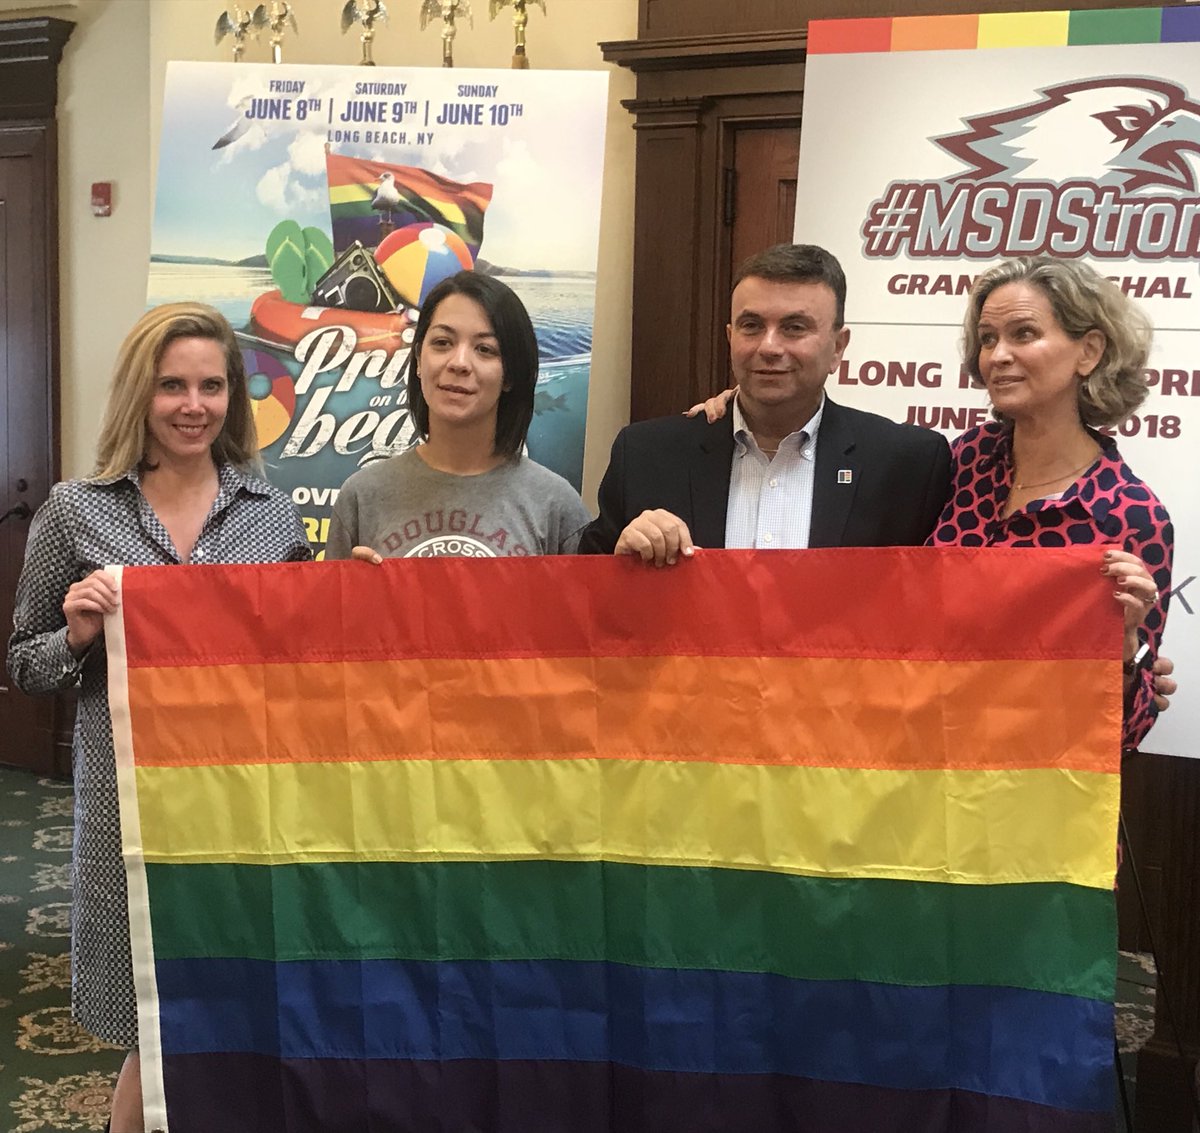 Thank you @NassauExecutive @DavidKilmnick @LGBTNetworkNY and of course Gwen Gossler for speaking out against hate and violence today. Looking forward to the 28th Annual @LIPride weekend led this year by students from Parkland FL #LIPride #ParklandStudentsSpeak